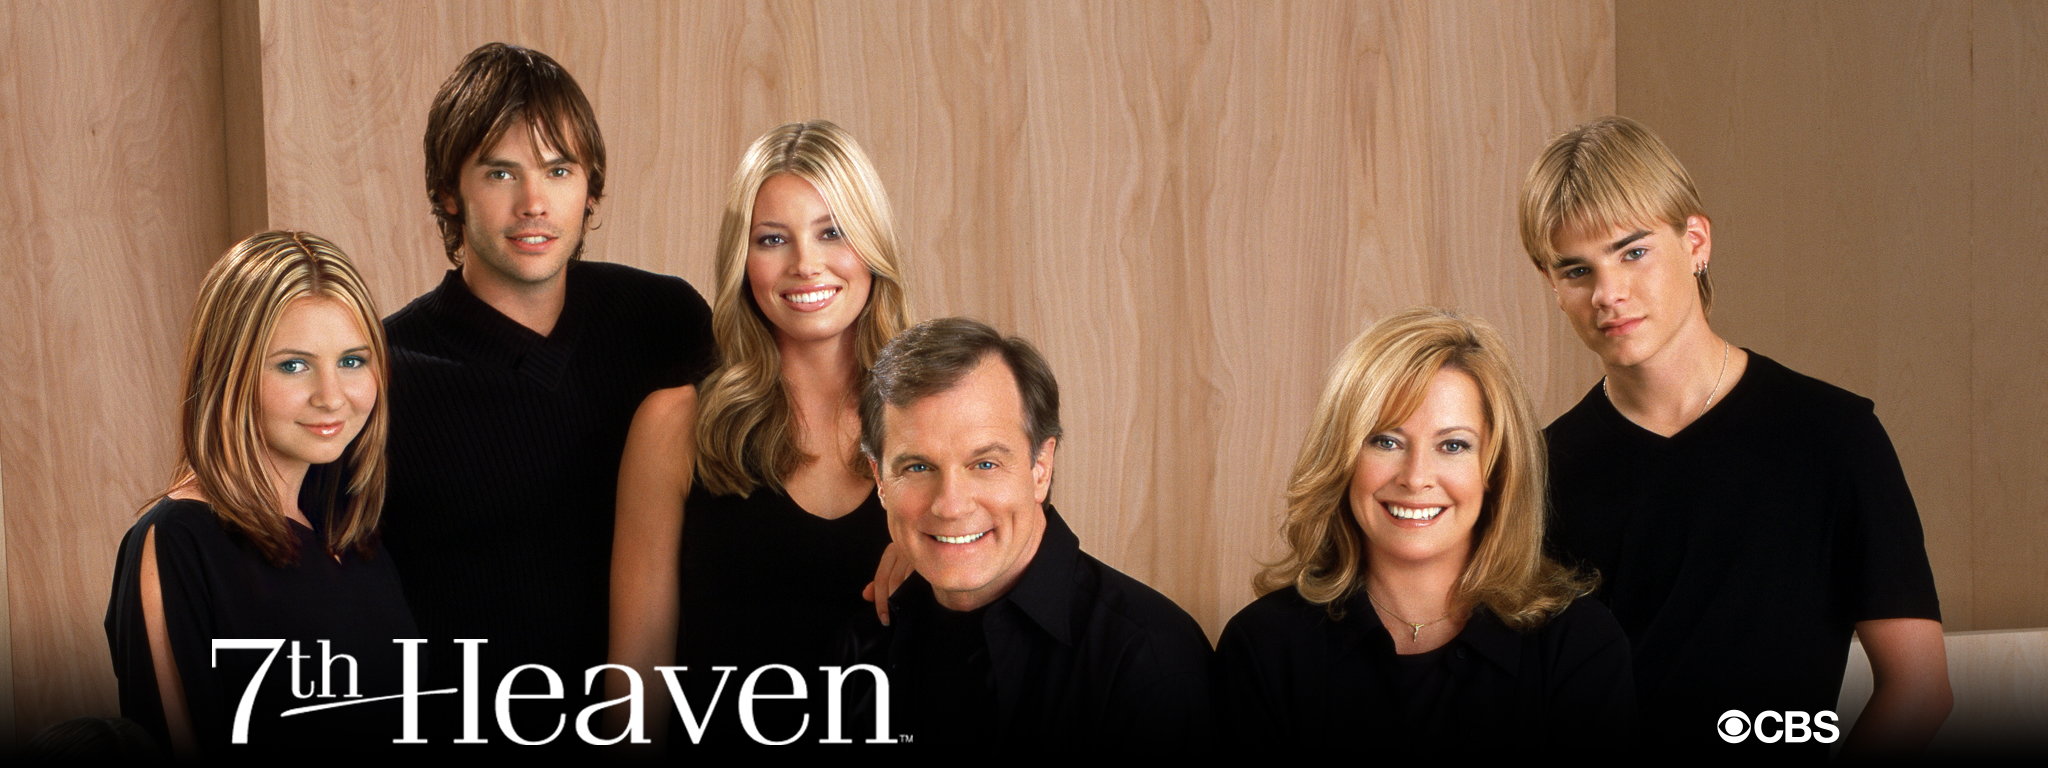 7th Heaven Pics, TV Show Collection